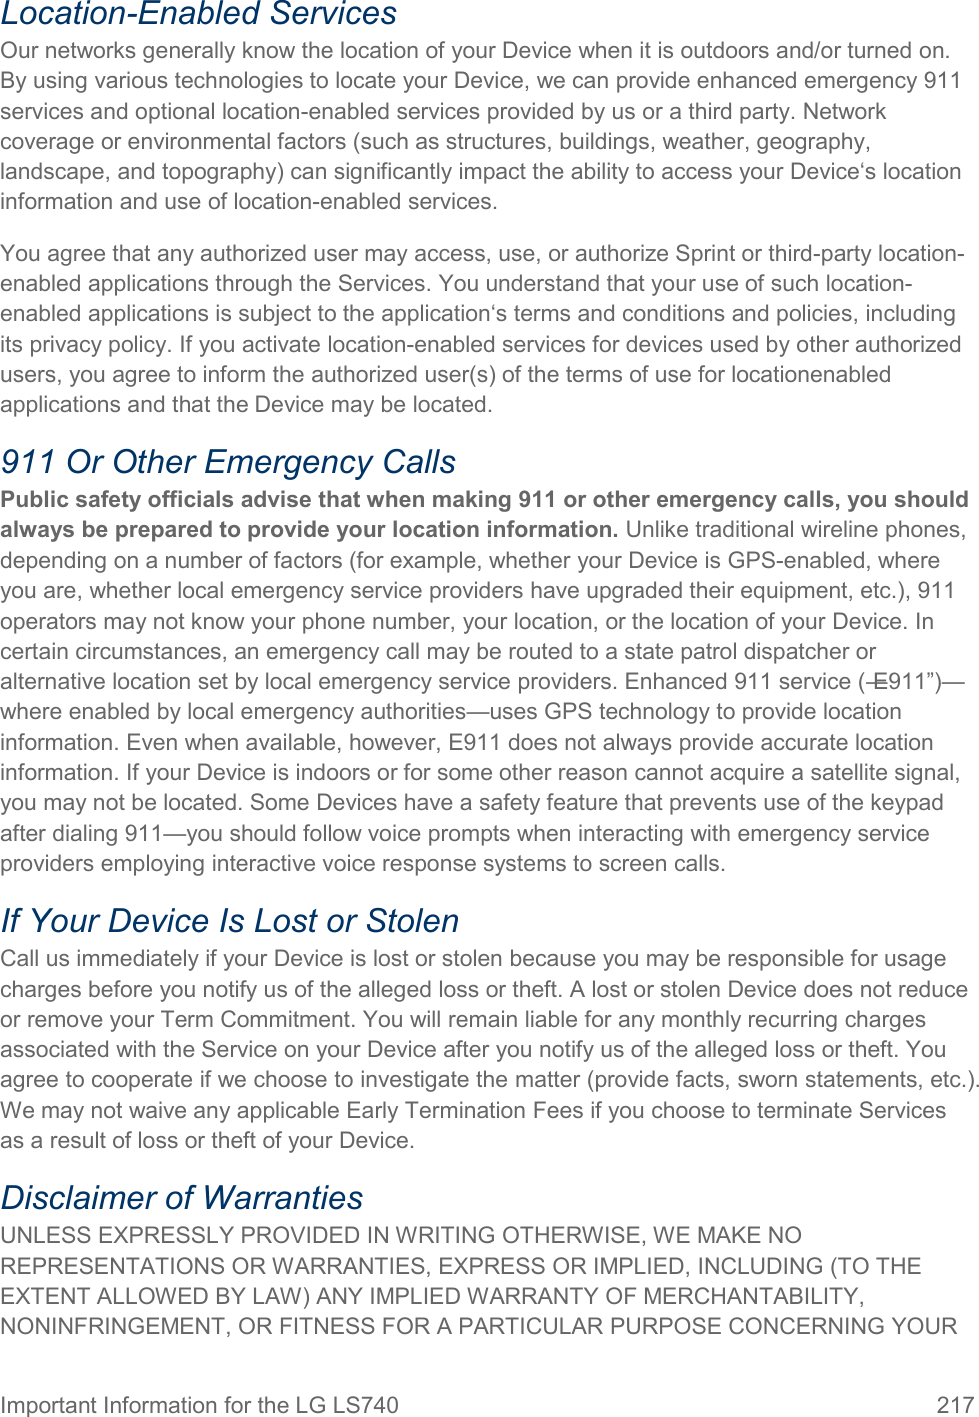 Important Information for the LG LS740  217 Location-Enabled Services Our networks generally know the location of your Device when it is outdoors and/or turned on. By using various technologies to locate your Device, we can provide enhanced emergency 911 services and optional location-enabled services provided by us or a third party. Network coverage or environmental factors (such as structures, buildings, weather, geography, landscape, and topography) can significantly impact the ability to access your Device‘s location information and use of location-enabled services. You agree that any authorized user may access, use, or authorize Sprint or third-party location-enabled applications through the Services. You understand that your use of such location-enabled applications is subject to the application‘s terms and conditions and policies, including its privacy policy. If you activate location-enabled services for devices used by other authorized users, you agree to inform the authorized user(s) of the terms of use for locationenabled applications and that the Device may be located. 911 Or Other Emergency Calls Public safety officials advise that when making 911 or other emergency calls, you should always be prepared to provide your location information. Unlike traditional wireline phones, depending on a number of factors (for example, whether your Device is GPS-enabled, where you are, whether local emergency service providers have upgraded their equipment, etc.), 911 operators may not know your phone number, your location, or the location of your Device. In certain circumstances, an emergency call may be routed to a state patrol dispatcher or alternative location set by local emergency service providers. Enhanced 911 service (―E911‖)—where enabled by local emergency authorities—uses GPS technology to provide location information. Even when available, however, E911 does not always provide accurate location information. If your Device is indoors or for some other reason cannot acquire a satellite signal, you may not be located. Some Devices have a safety feature that prevents use of the keypad after dialing 911—you should follow voice prompts when interacting with emergency service providers employing interactive voice response systems to screen calls. If Your Device Is Lost or Stolen  Call us immediately if your Device is lost or stolen because you may be responsible for usage charges before you notify us of the alleged loss or theft. A lost or stolen Device does not reduce or remove your Term Commitment. You will remain liable for any monthly recurring charges associated with the Service on your Device after you notify us of the alleged loss or theft. You agree to cooperate if we choose to investigate the matter (provide facts, sworn statements, etc.). We may not waive any applicable Early Termination Fees if you choose to terminate Services as a result of loss or theft of your Device. Disclaimer of Warranties UNLESS EXPRESSLY PROVIDED IN WRITING OTHERWISE, WE MAKE NO REPRESENTATIONS OR WARRANTIES, EXPRESS OR IMPLIED, INCLUDING (TO THE EXTENT ALLOWED BY LAW) ANY IMPLIED WARRANTY OF MERCHANTABILITY, NONINFRINGEMENT, OR FITNESS FOR A PARTICULAR PURPOSE CONCERNING YOUR 